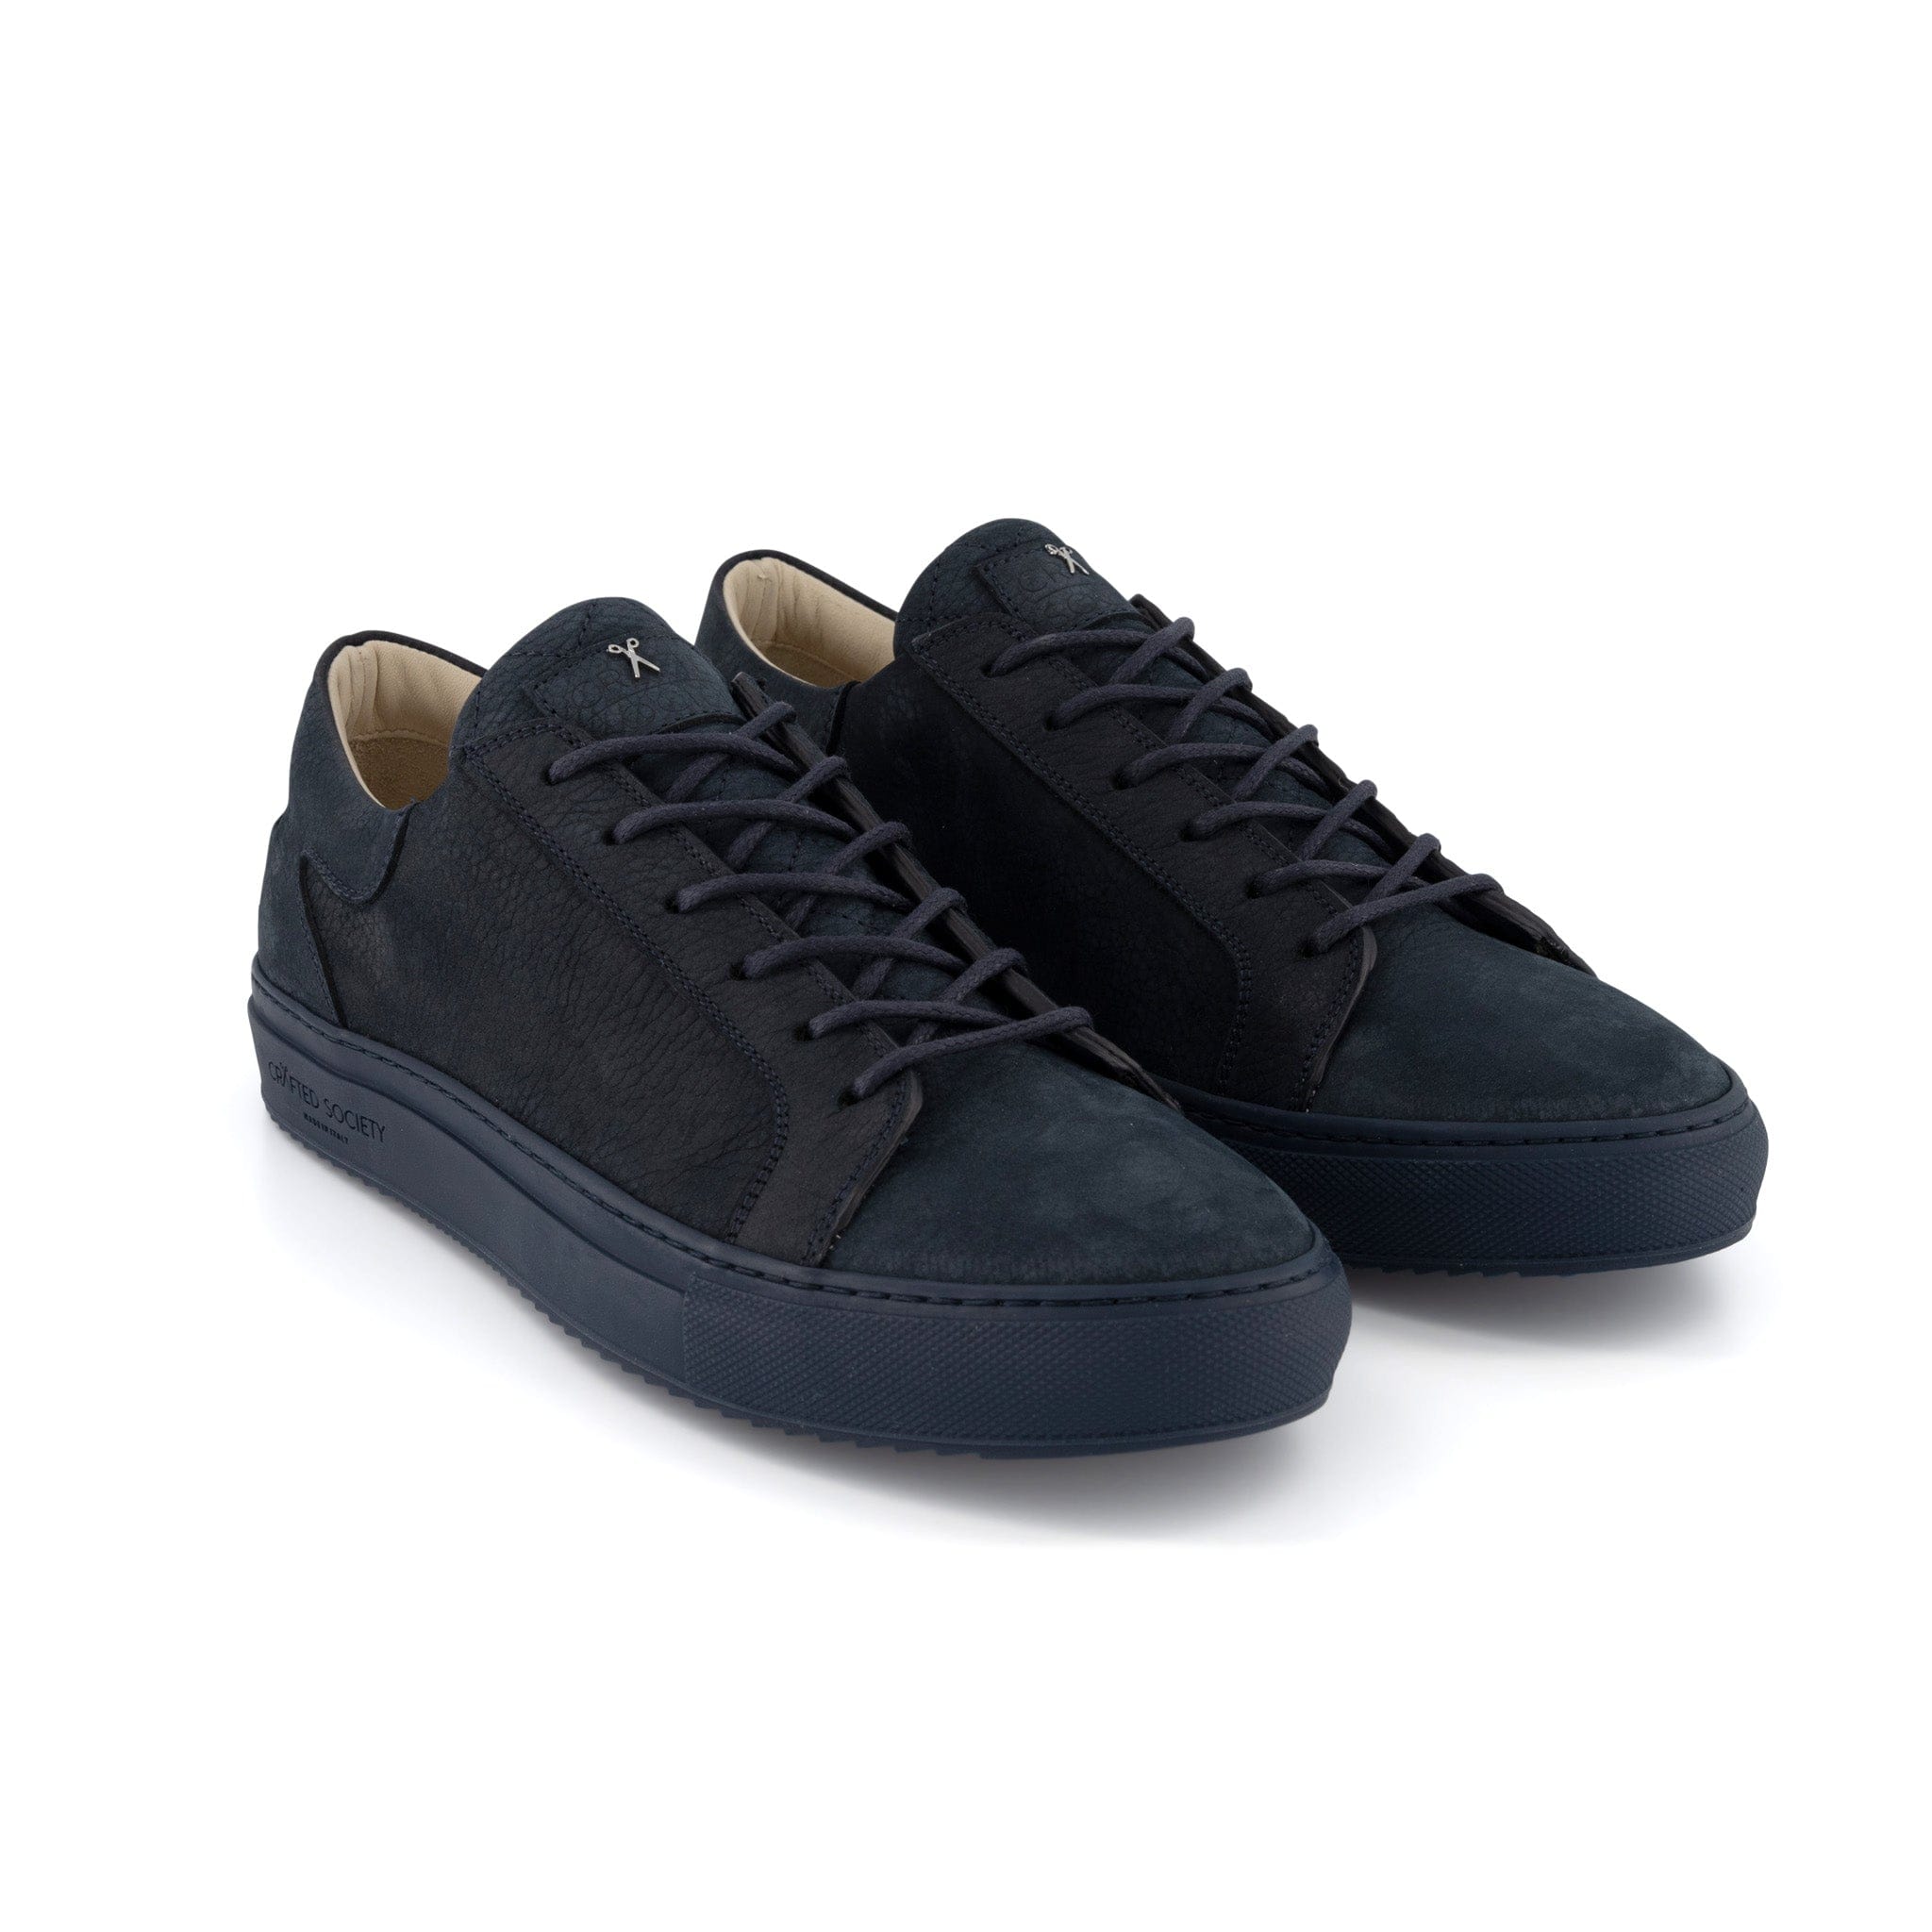 Mario Low Refined Sneaker | Navy Nubuck | Navy Outsole | Made in Italy